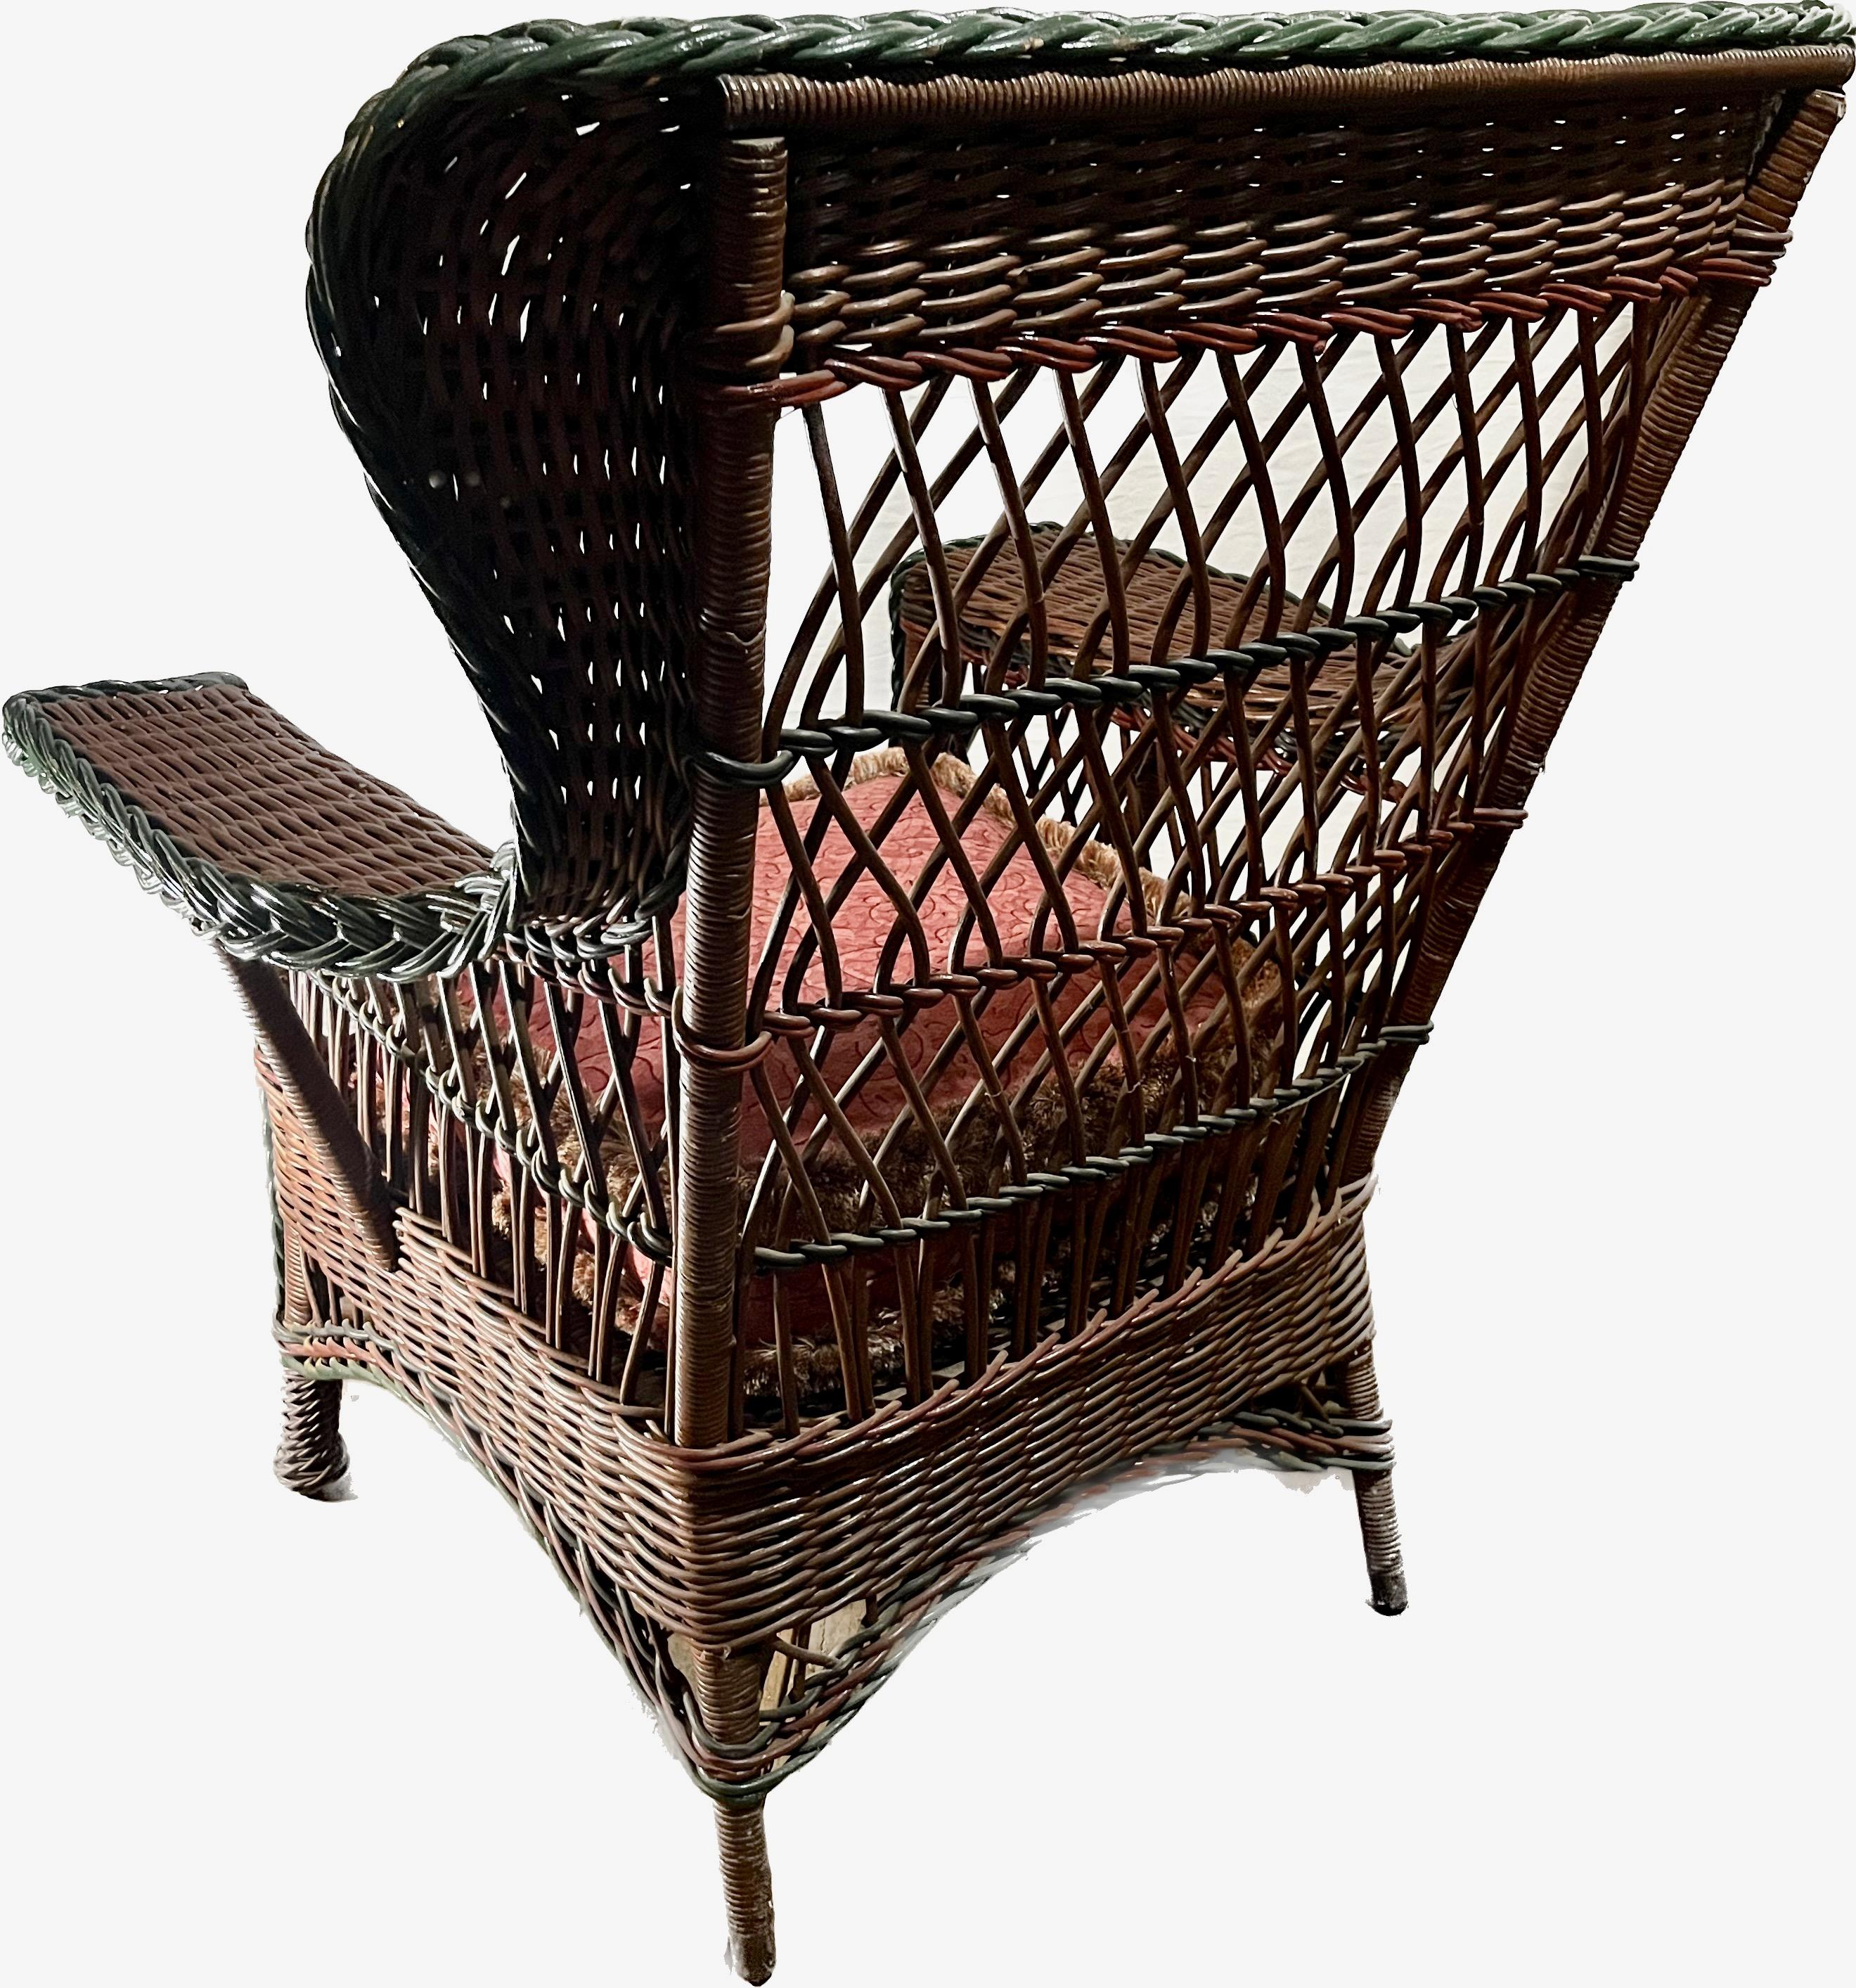 Early 20th Century Antique Bar Harbor Style Wicker Wing Chair in Natural Finish with Green Trim